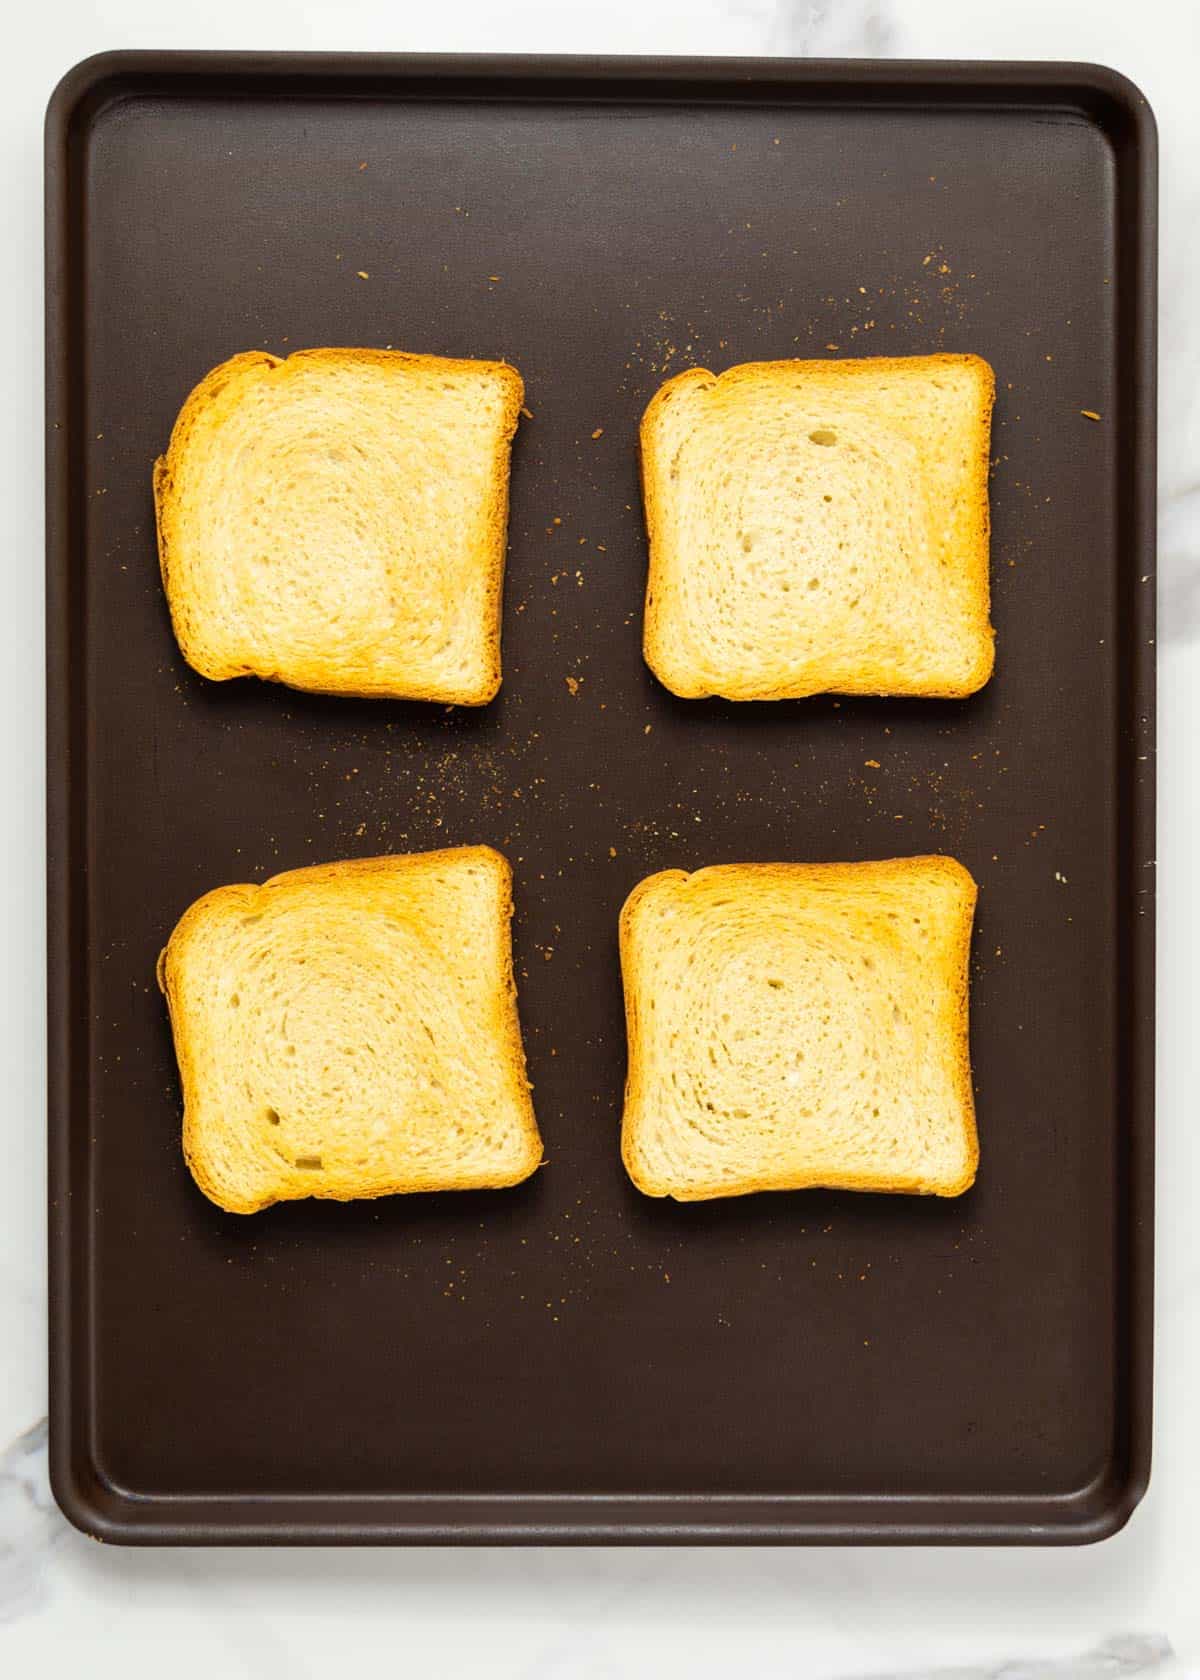 bread slices baked on a baking sheet.